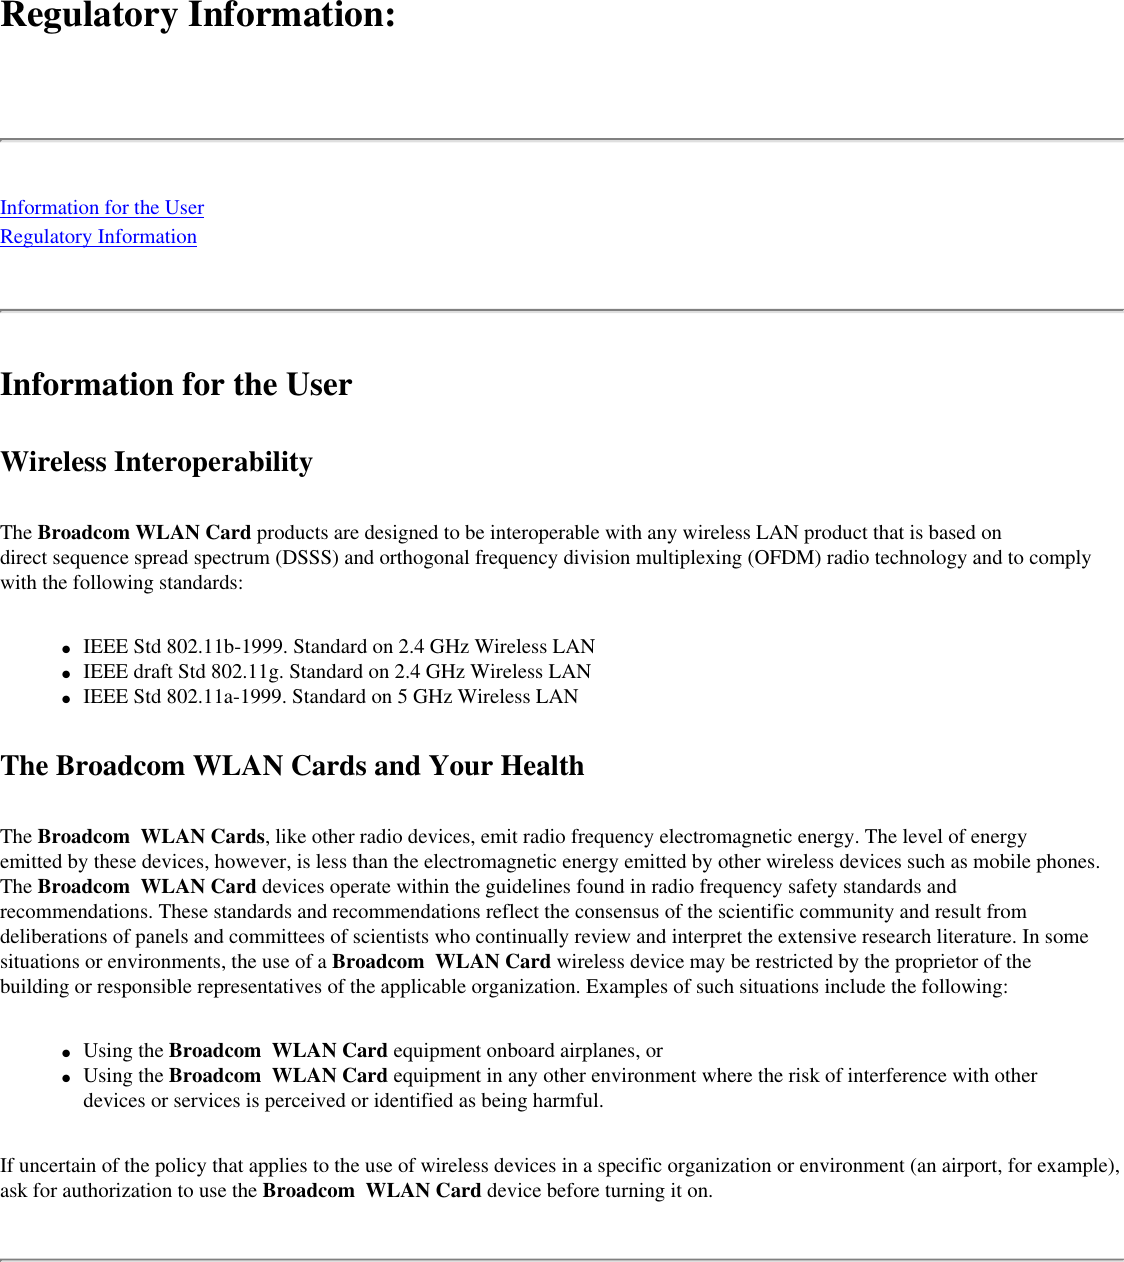 Regulatory Information: Information for the UserRegulatory InformationInformation for the UserWireless InteroperabilityThe Broadcom WLAN Card products are designed to be interoperable with any wireless LAN product that is based on direct sequence spread spectrum (DSSS) and orthogonal frequency division multiplexing (OFDM) radio technology and to comply with the following standards:●     IEEE Std 802.11b-1999. Standard on 2.4 GHz Wireless LAN●     IEEE draft Std 802.11g. Standard on 2.4 GHz Wireless LAN●     IEEE Std 802.11a-1999. Standard on 5 GHz Wireless LANThe Broadcom WLAN Cards and Your HealthThe Broadcom  WLAN Cards, like other radio devices, emit radio frequency electromagnetic energy. The level of energy emitted by these devices, however, is less than the electromagnetic energy emitted by other wireless devices such as mobile phones. The Broadcom  WLAN Card devices operate within the guidelines found in radio frequency safety standards and recommendations. These standards and recommendations reflect the consensus of the scientific community and result from deliberations of panels and committees of scientists who continually review and interpret the extensive research literature. In some situations or environments, the use of a Broadcom  WLAN Card wireless device may be restricted by the proprietor of the building or responsible representatives of the applicable organization. Examples of such situations include the following:●     Using the Broadcom  WLAN Card equipment onboard airplanes, or●     Using the Broadcom  WLAN Card equipment in any other environment where the risk of interference with other devices or services is perceived or identified as being harmful.If uncertain of the policy that applies to the use of wireless devices in a specific organization or environment (an airport, for example), ask for authorization to use the Broadcom  WLAN Card device before turning it on.